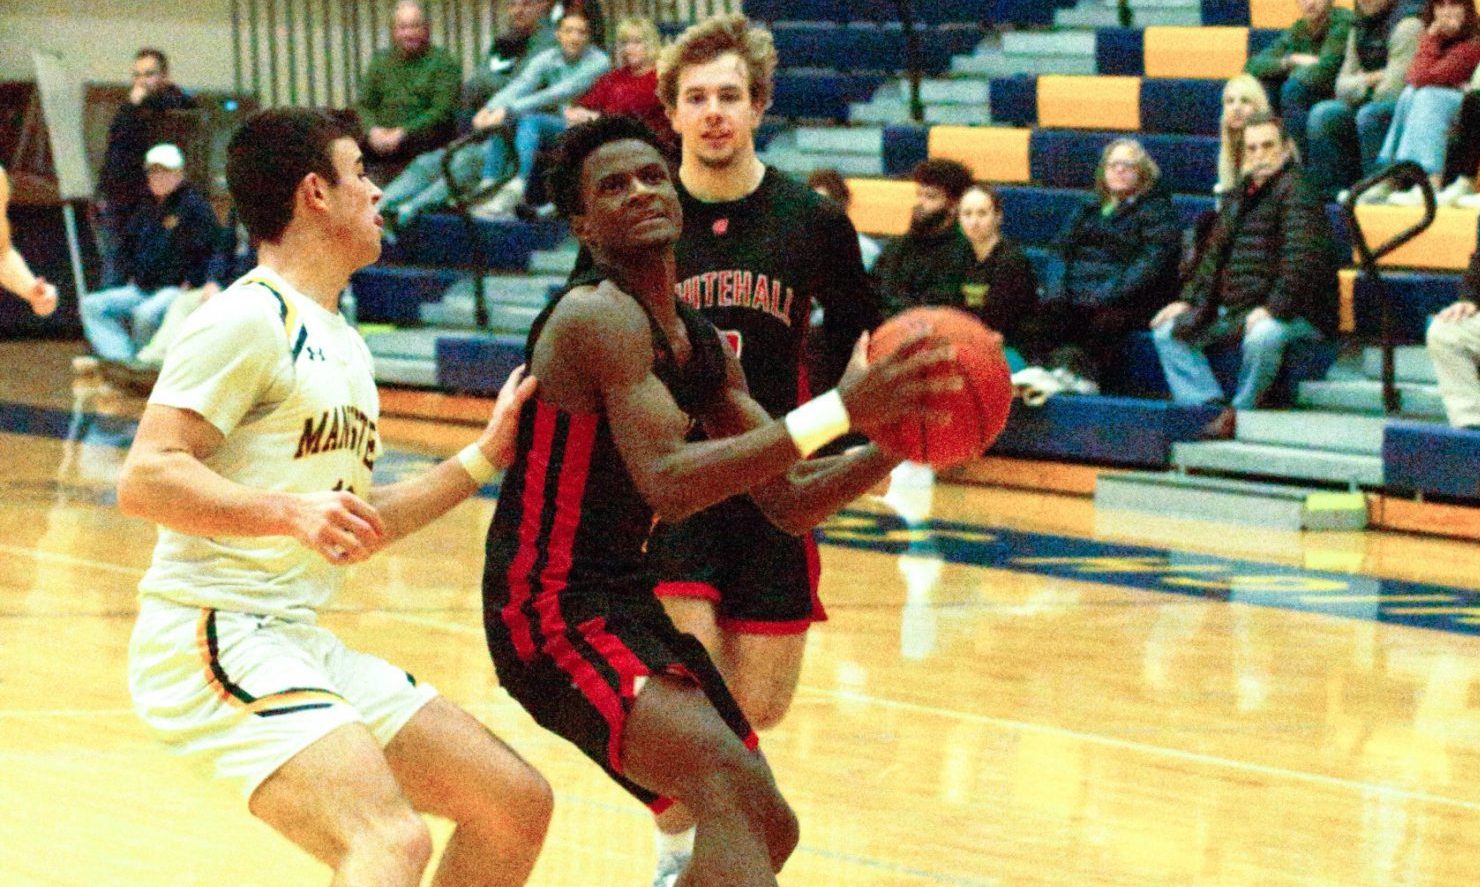 Whitehall ambushes Manistee, races to another lopsided victory